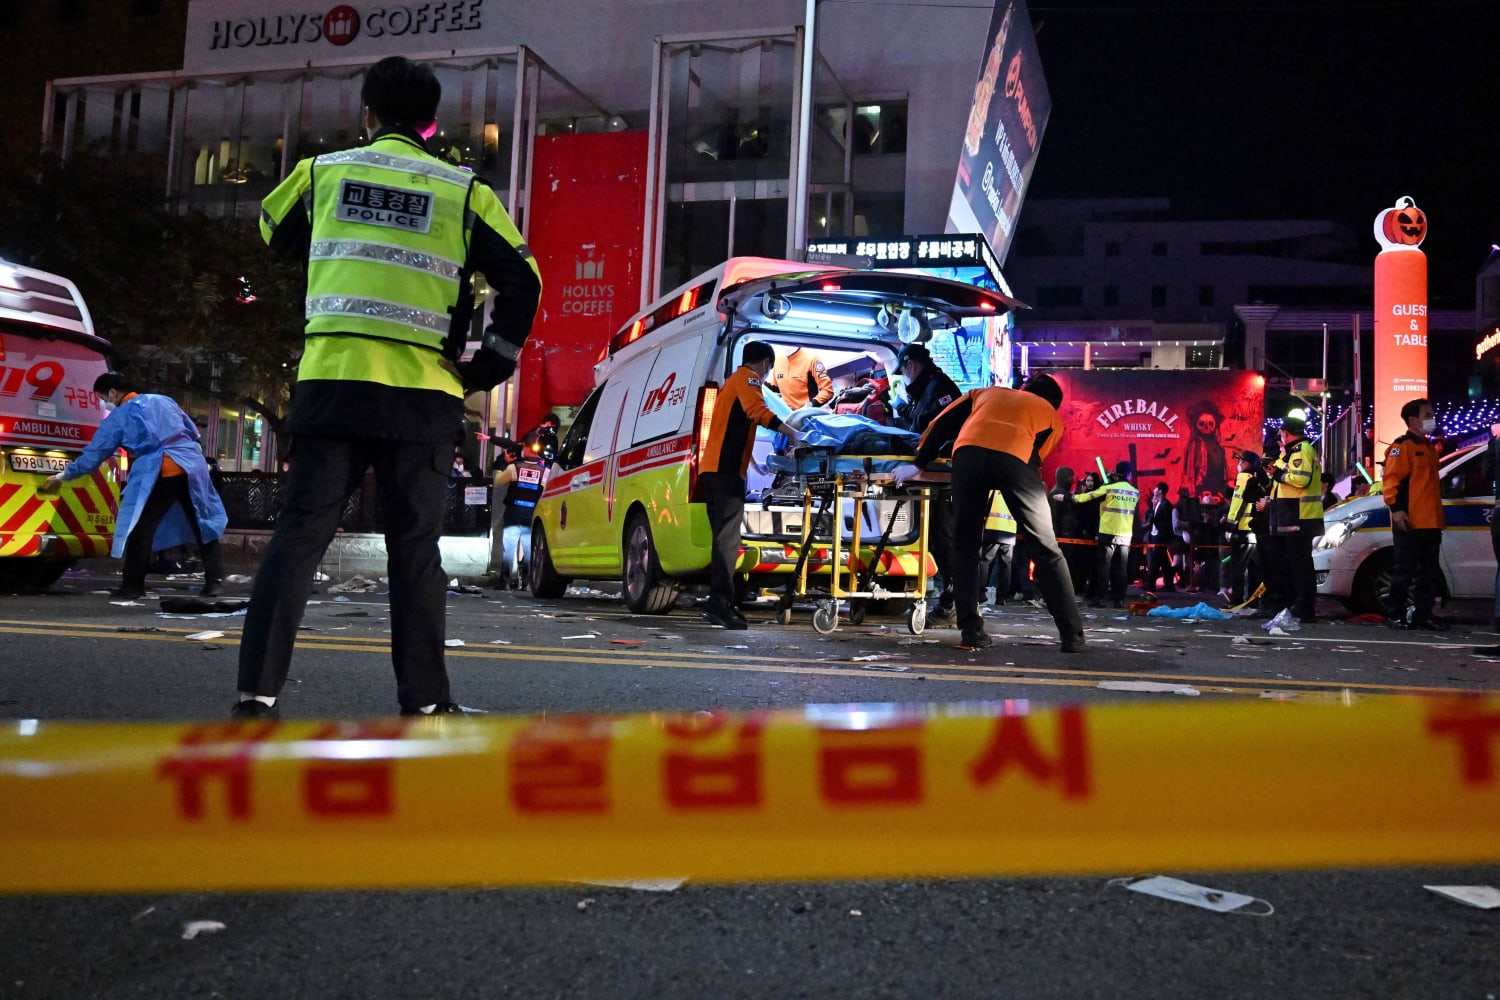 'A recipe for disaster': Seoul’s deadly crush was avoidable, experts say